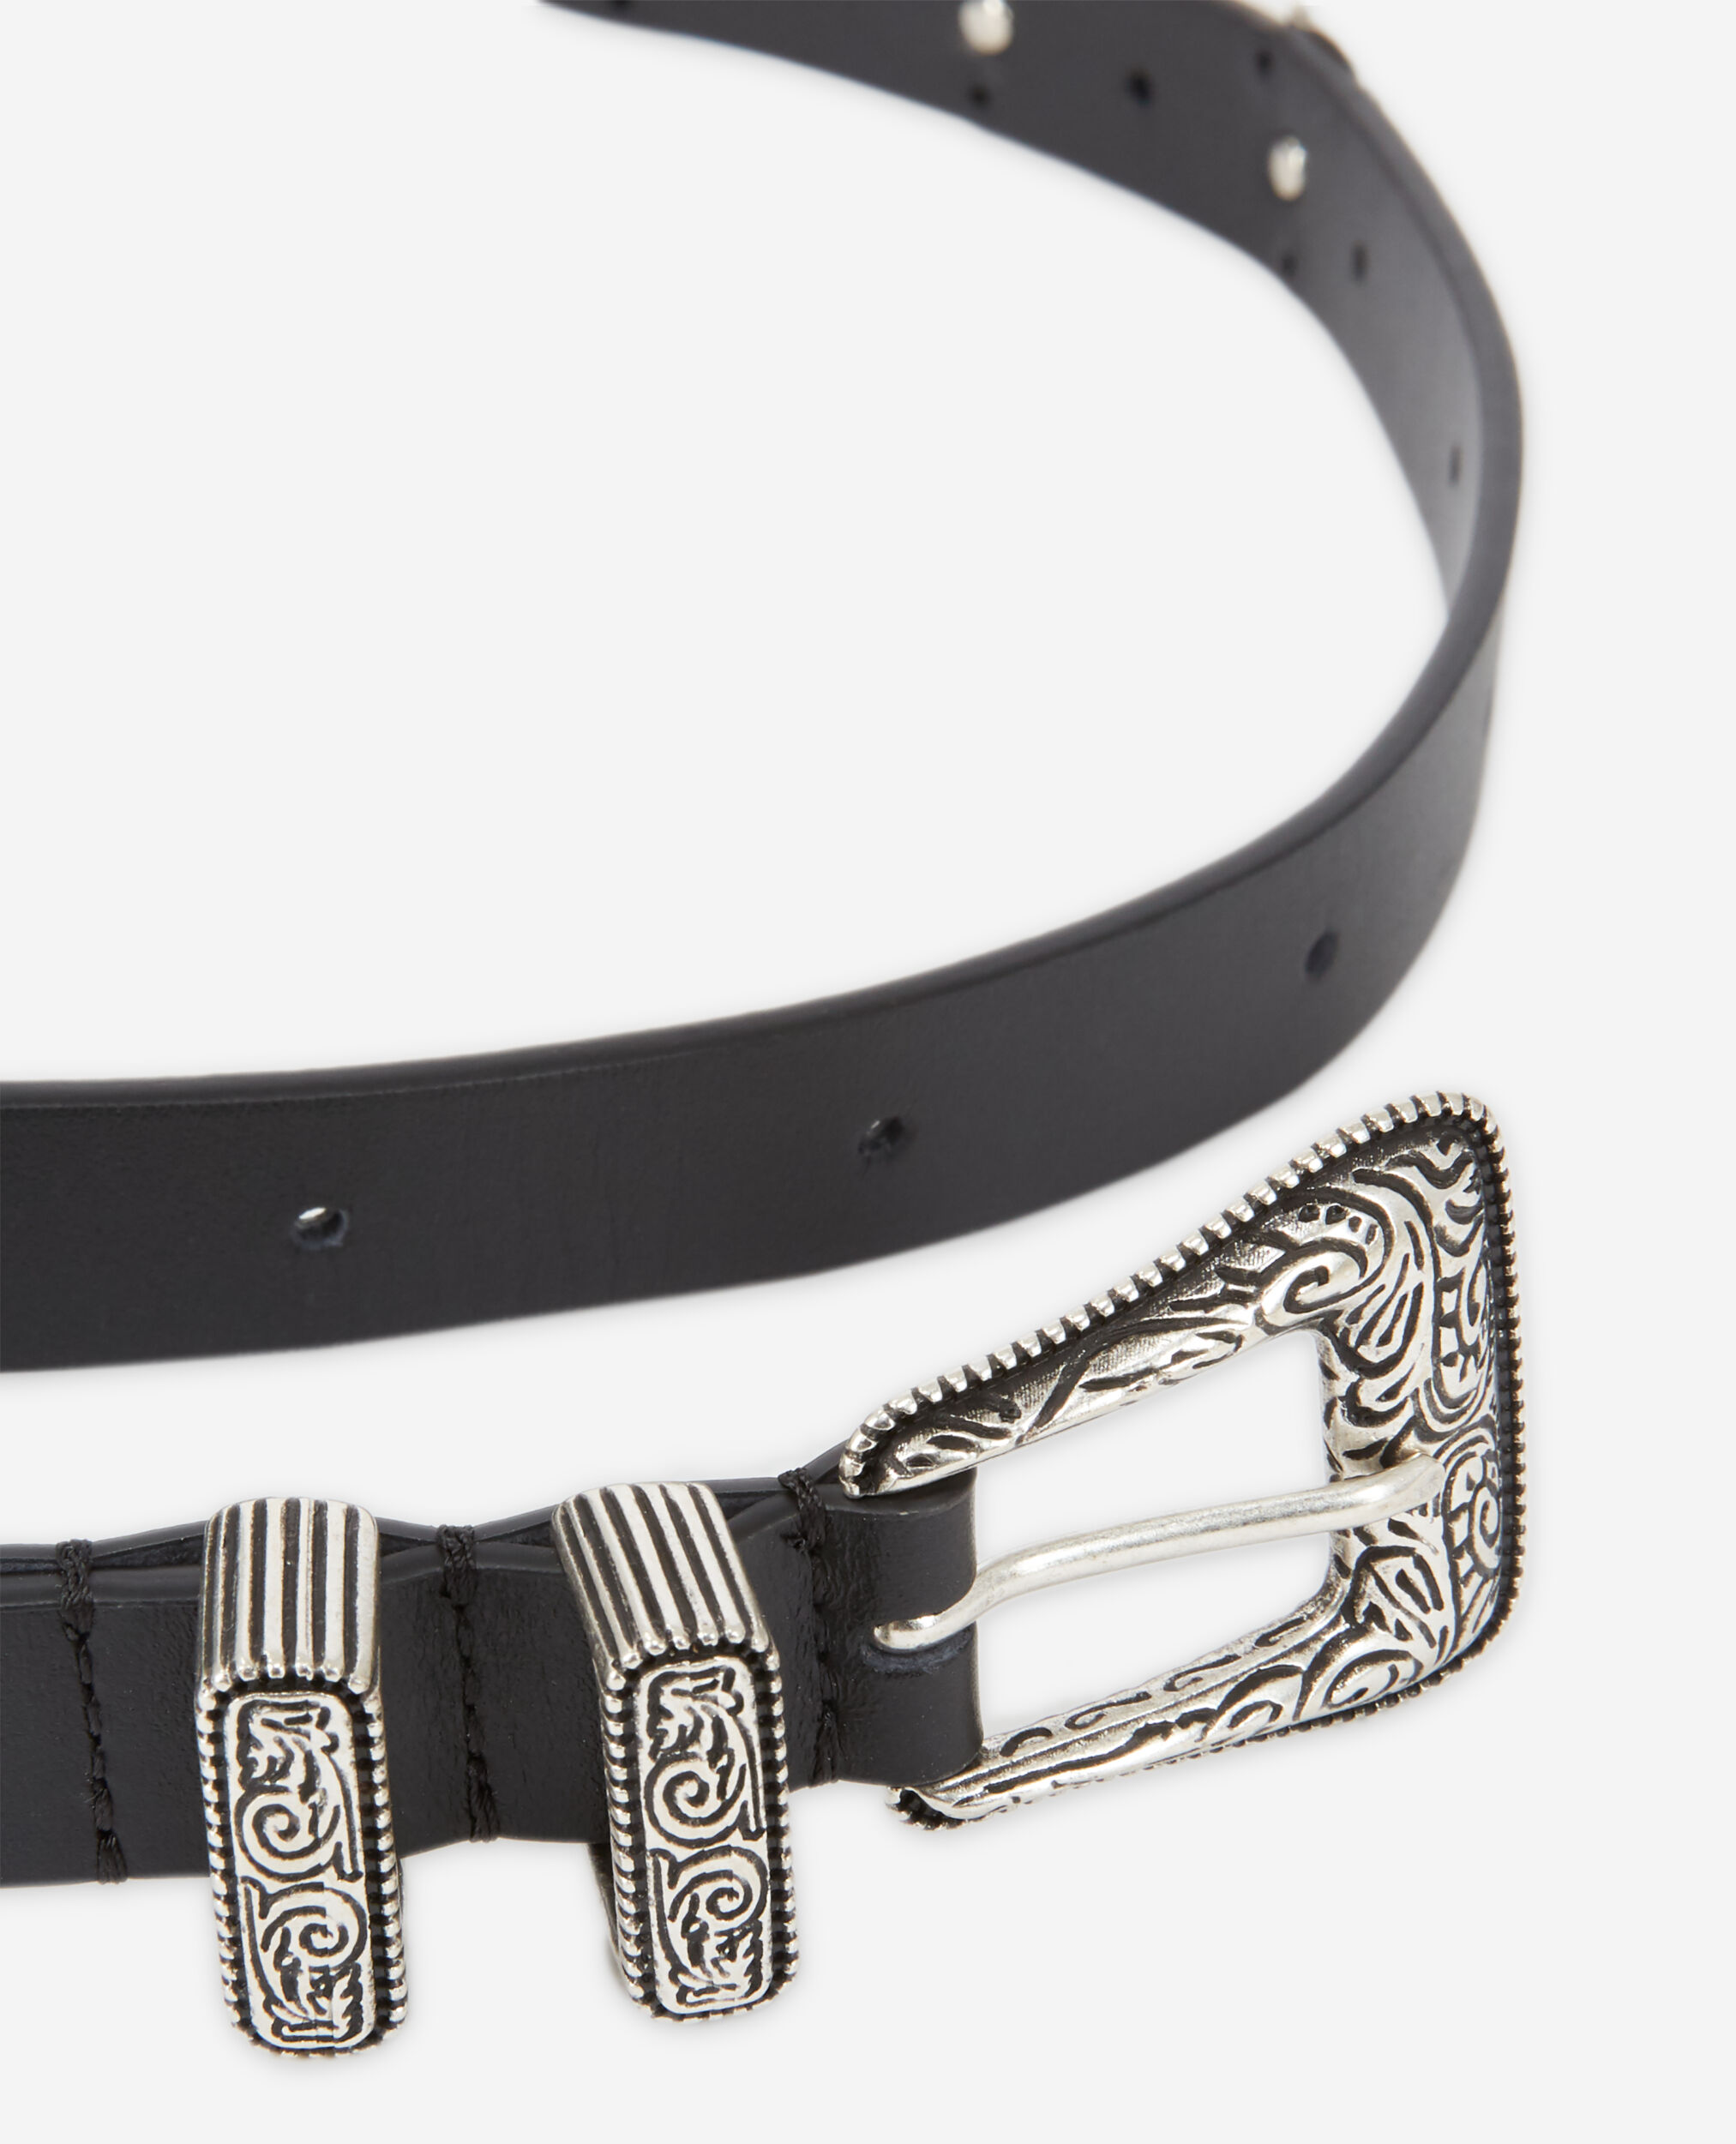 Thin black belt with logo and Western-style buckle, BLACK, hi-res image number null